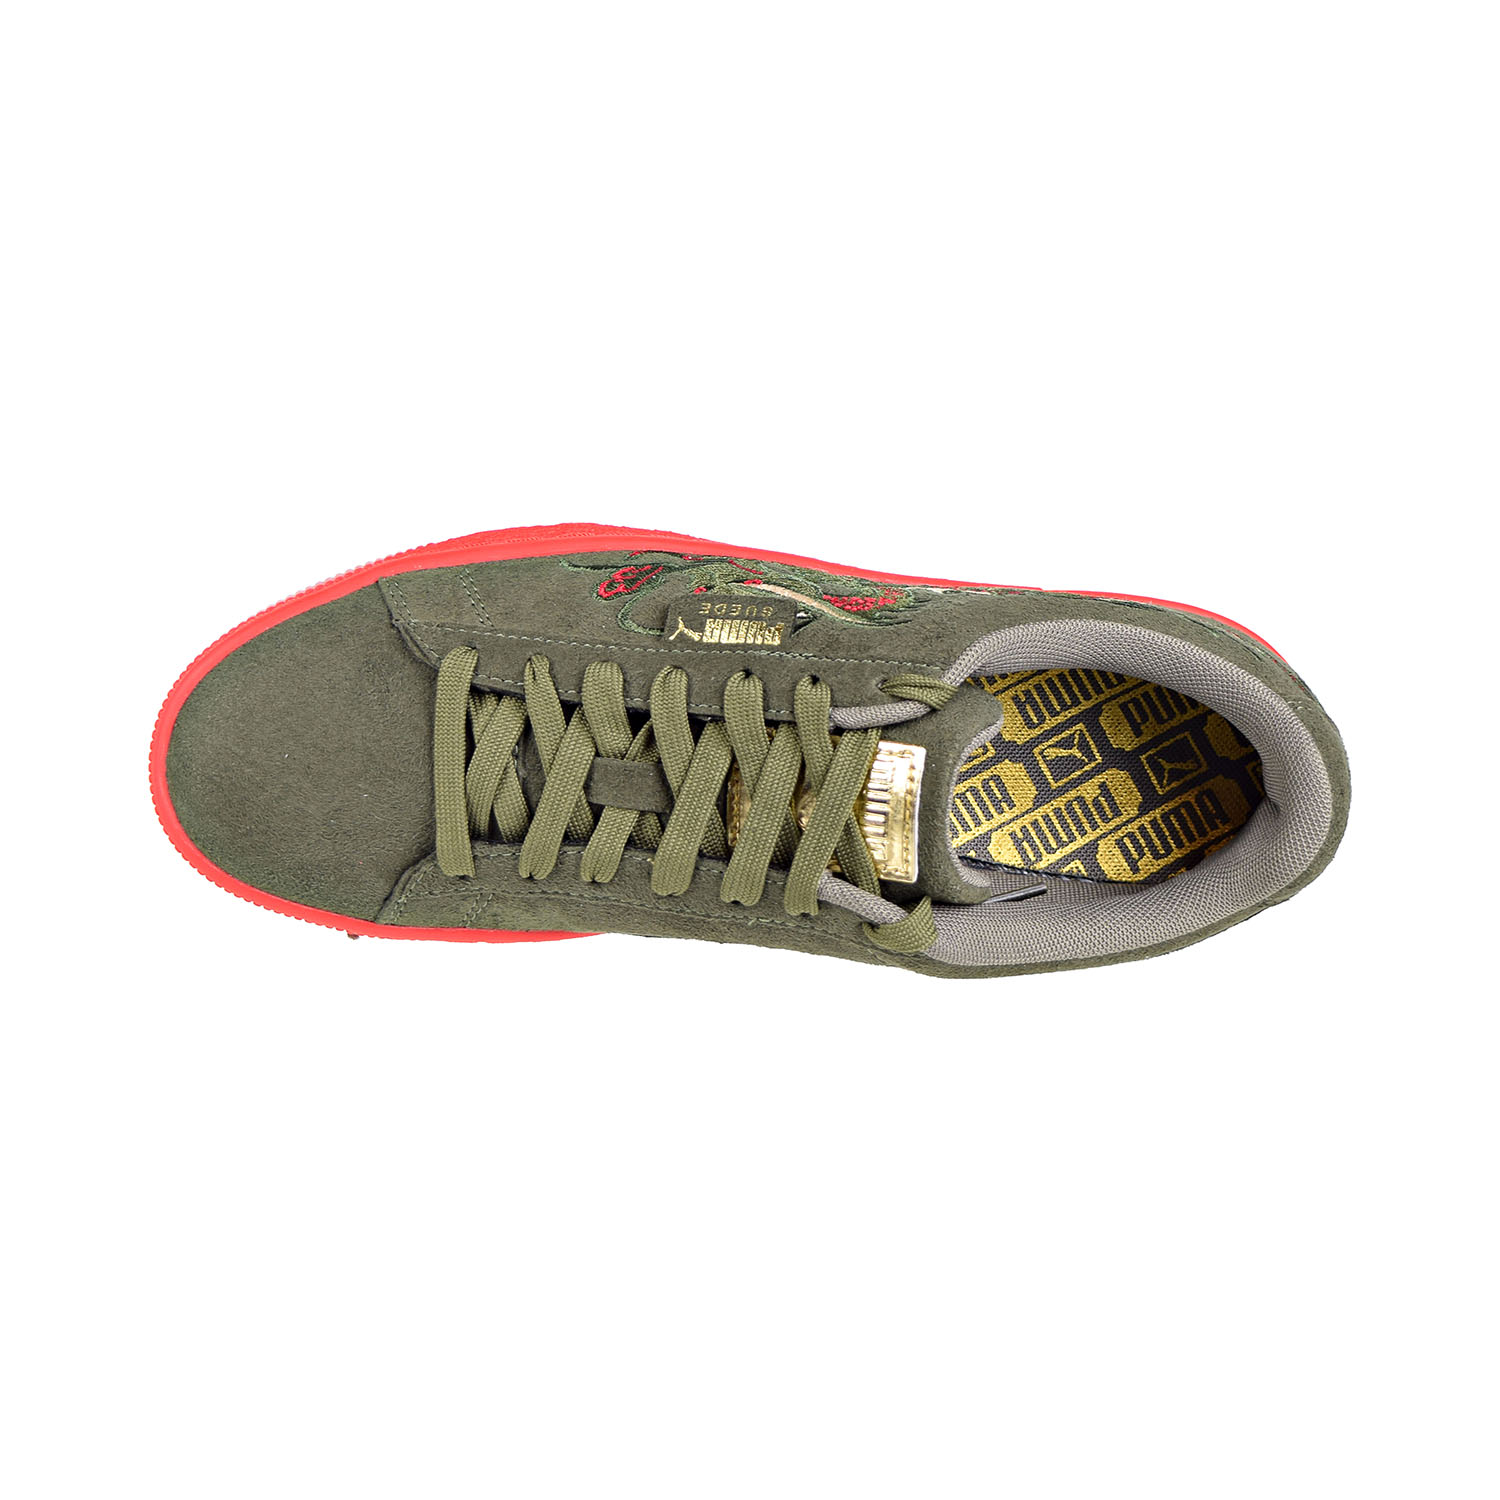 Puma Court Classic Dragon Patch Men's Shoes Burnt Olive/High Risk Red 368359-01 - image 5 of 6